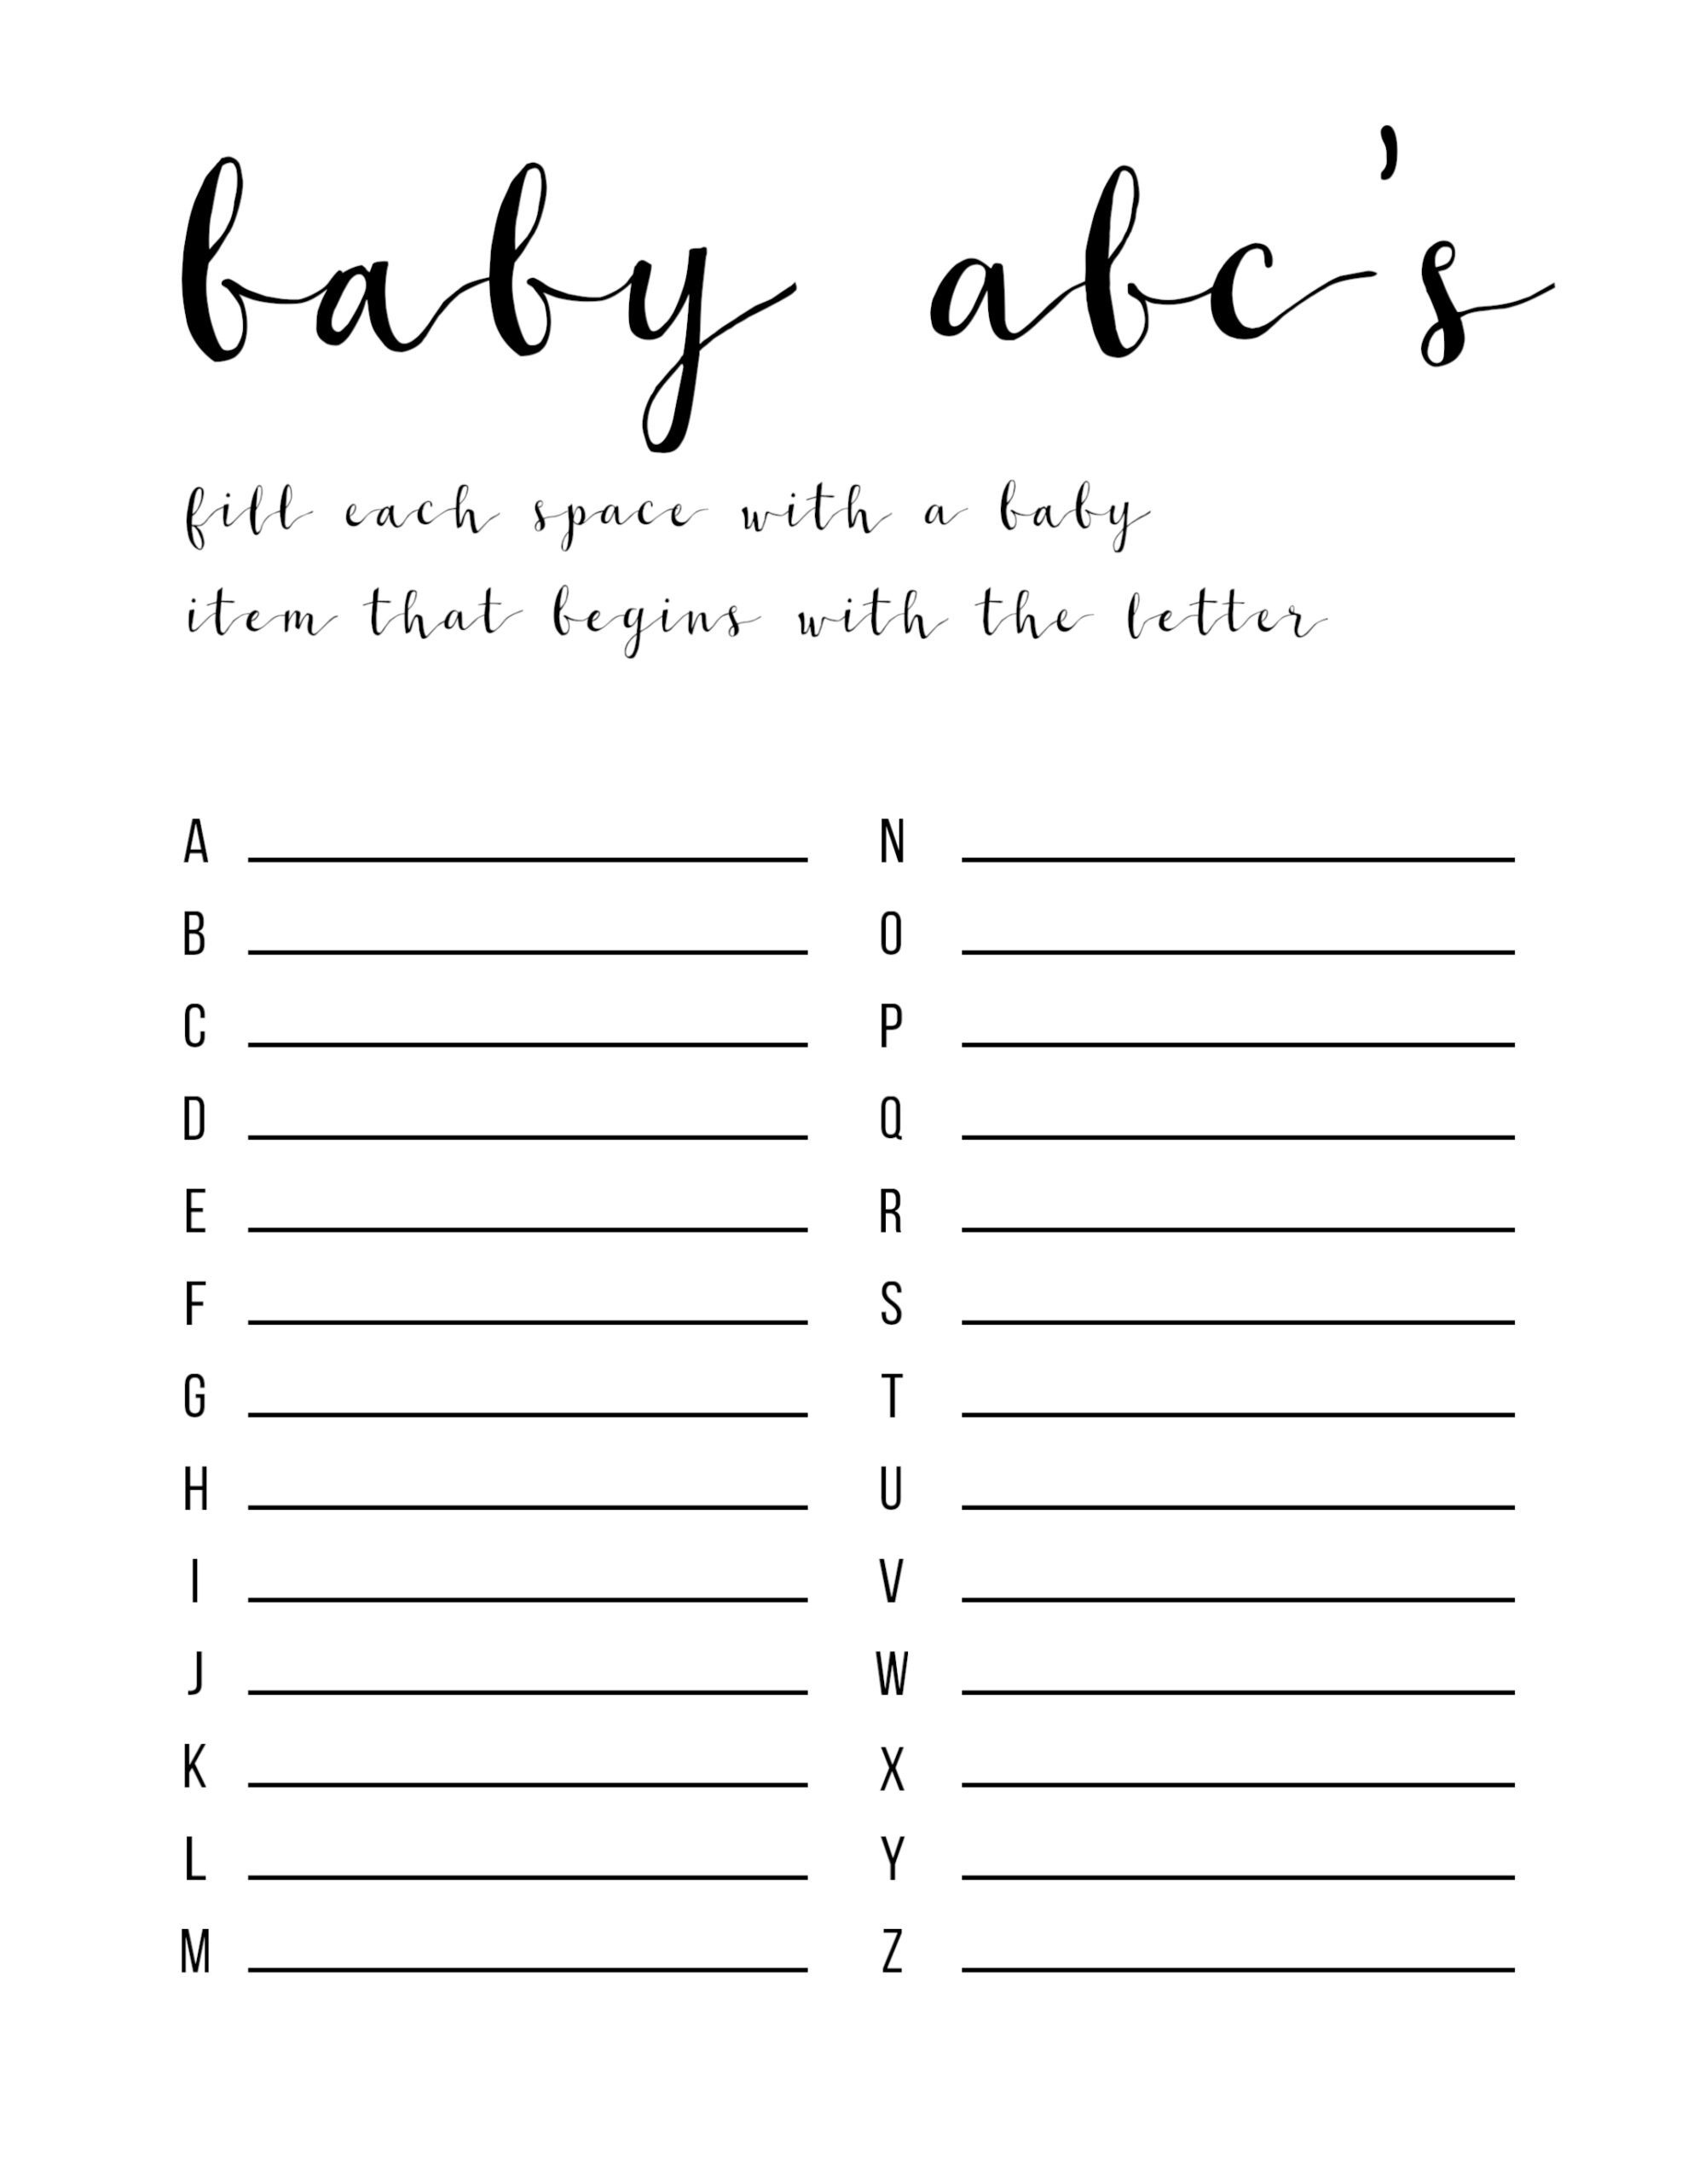 Baby Shower Games Ideas {Abc Game Free Printable} - Paper Trail Design - Unique Baby Shower Games Free Printable